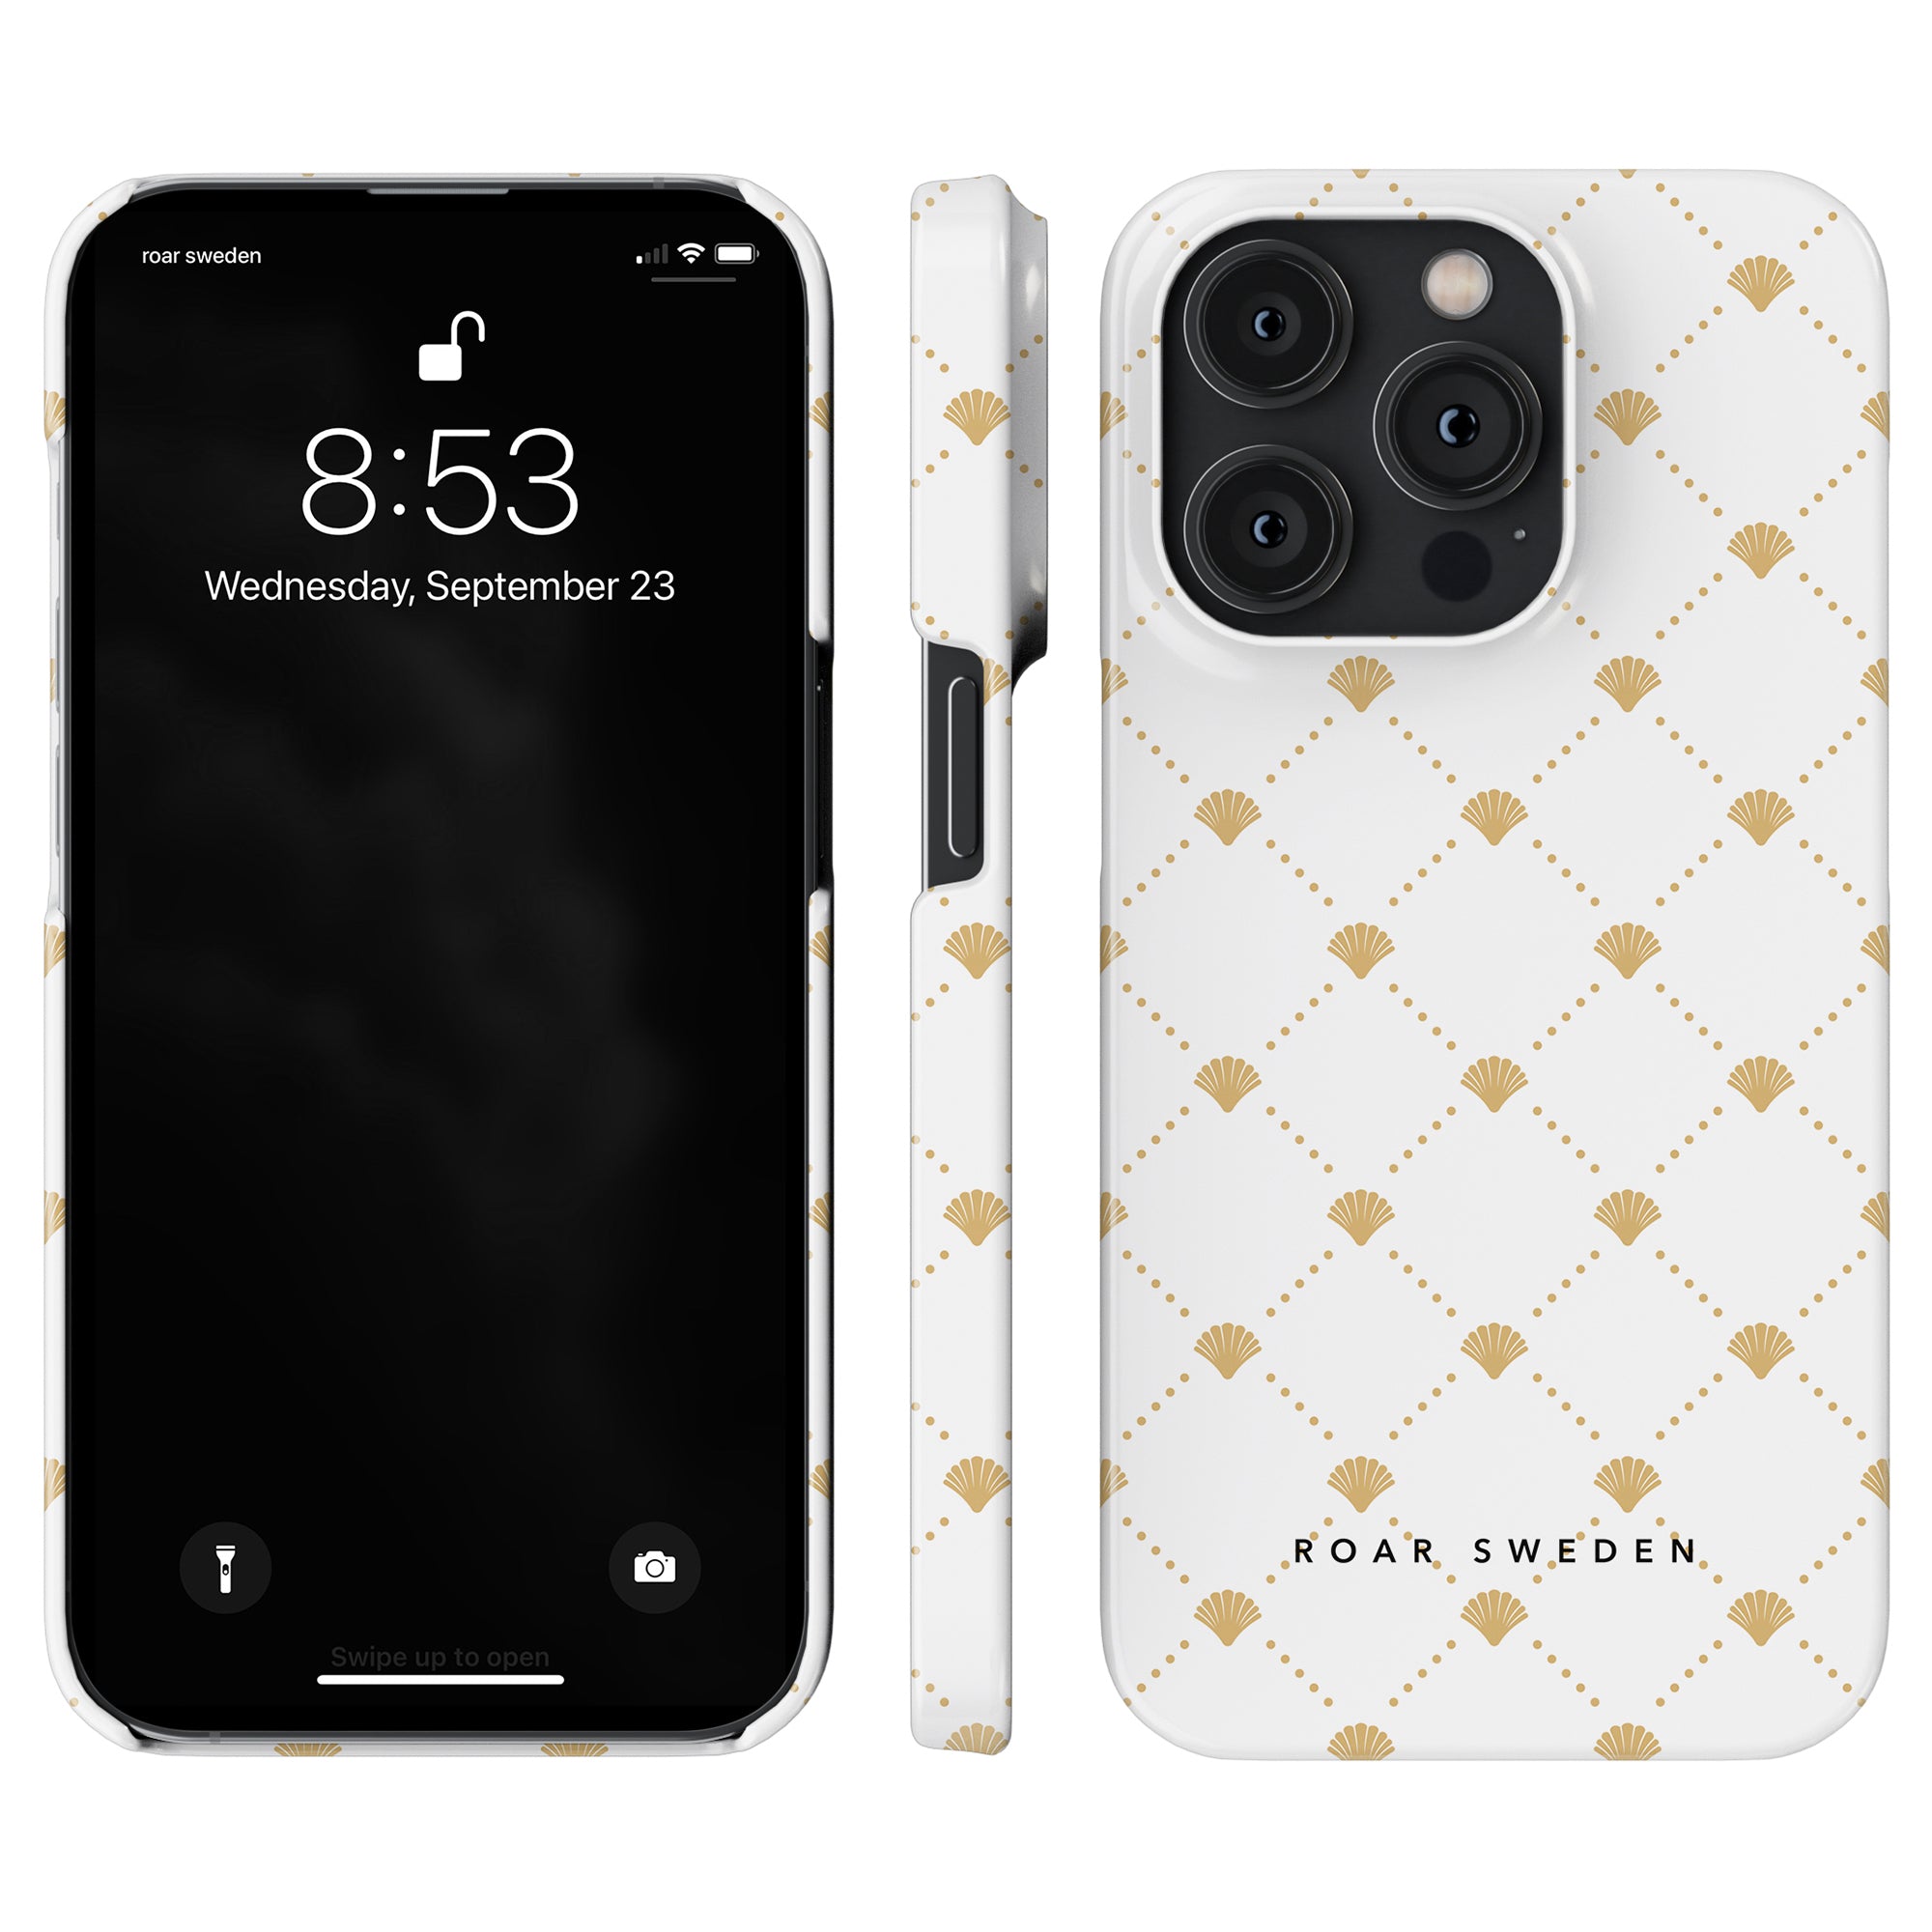 iPhone with a Luxe Shells White - Slim case from Roar Sweden's Ocean Collection, displaying the lock screen with the time 8:53 and date Wednesday, September 23.